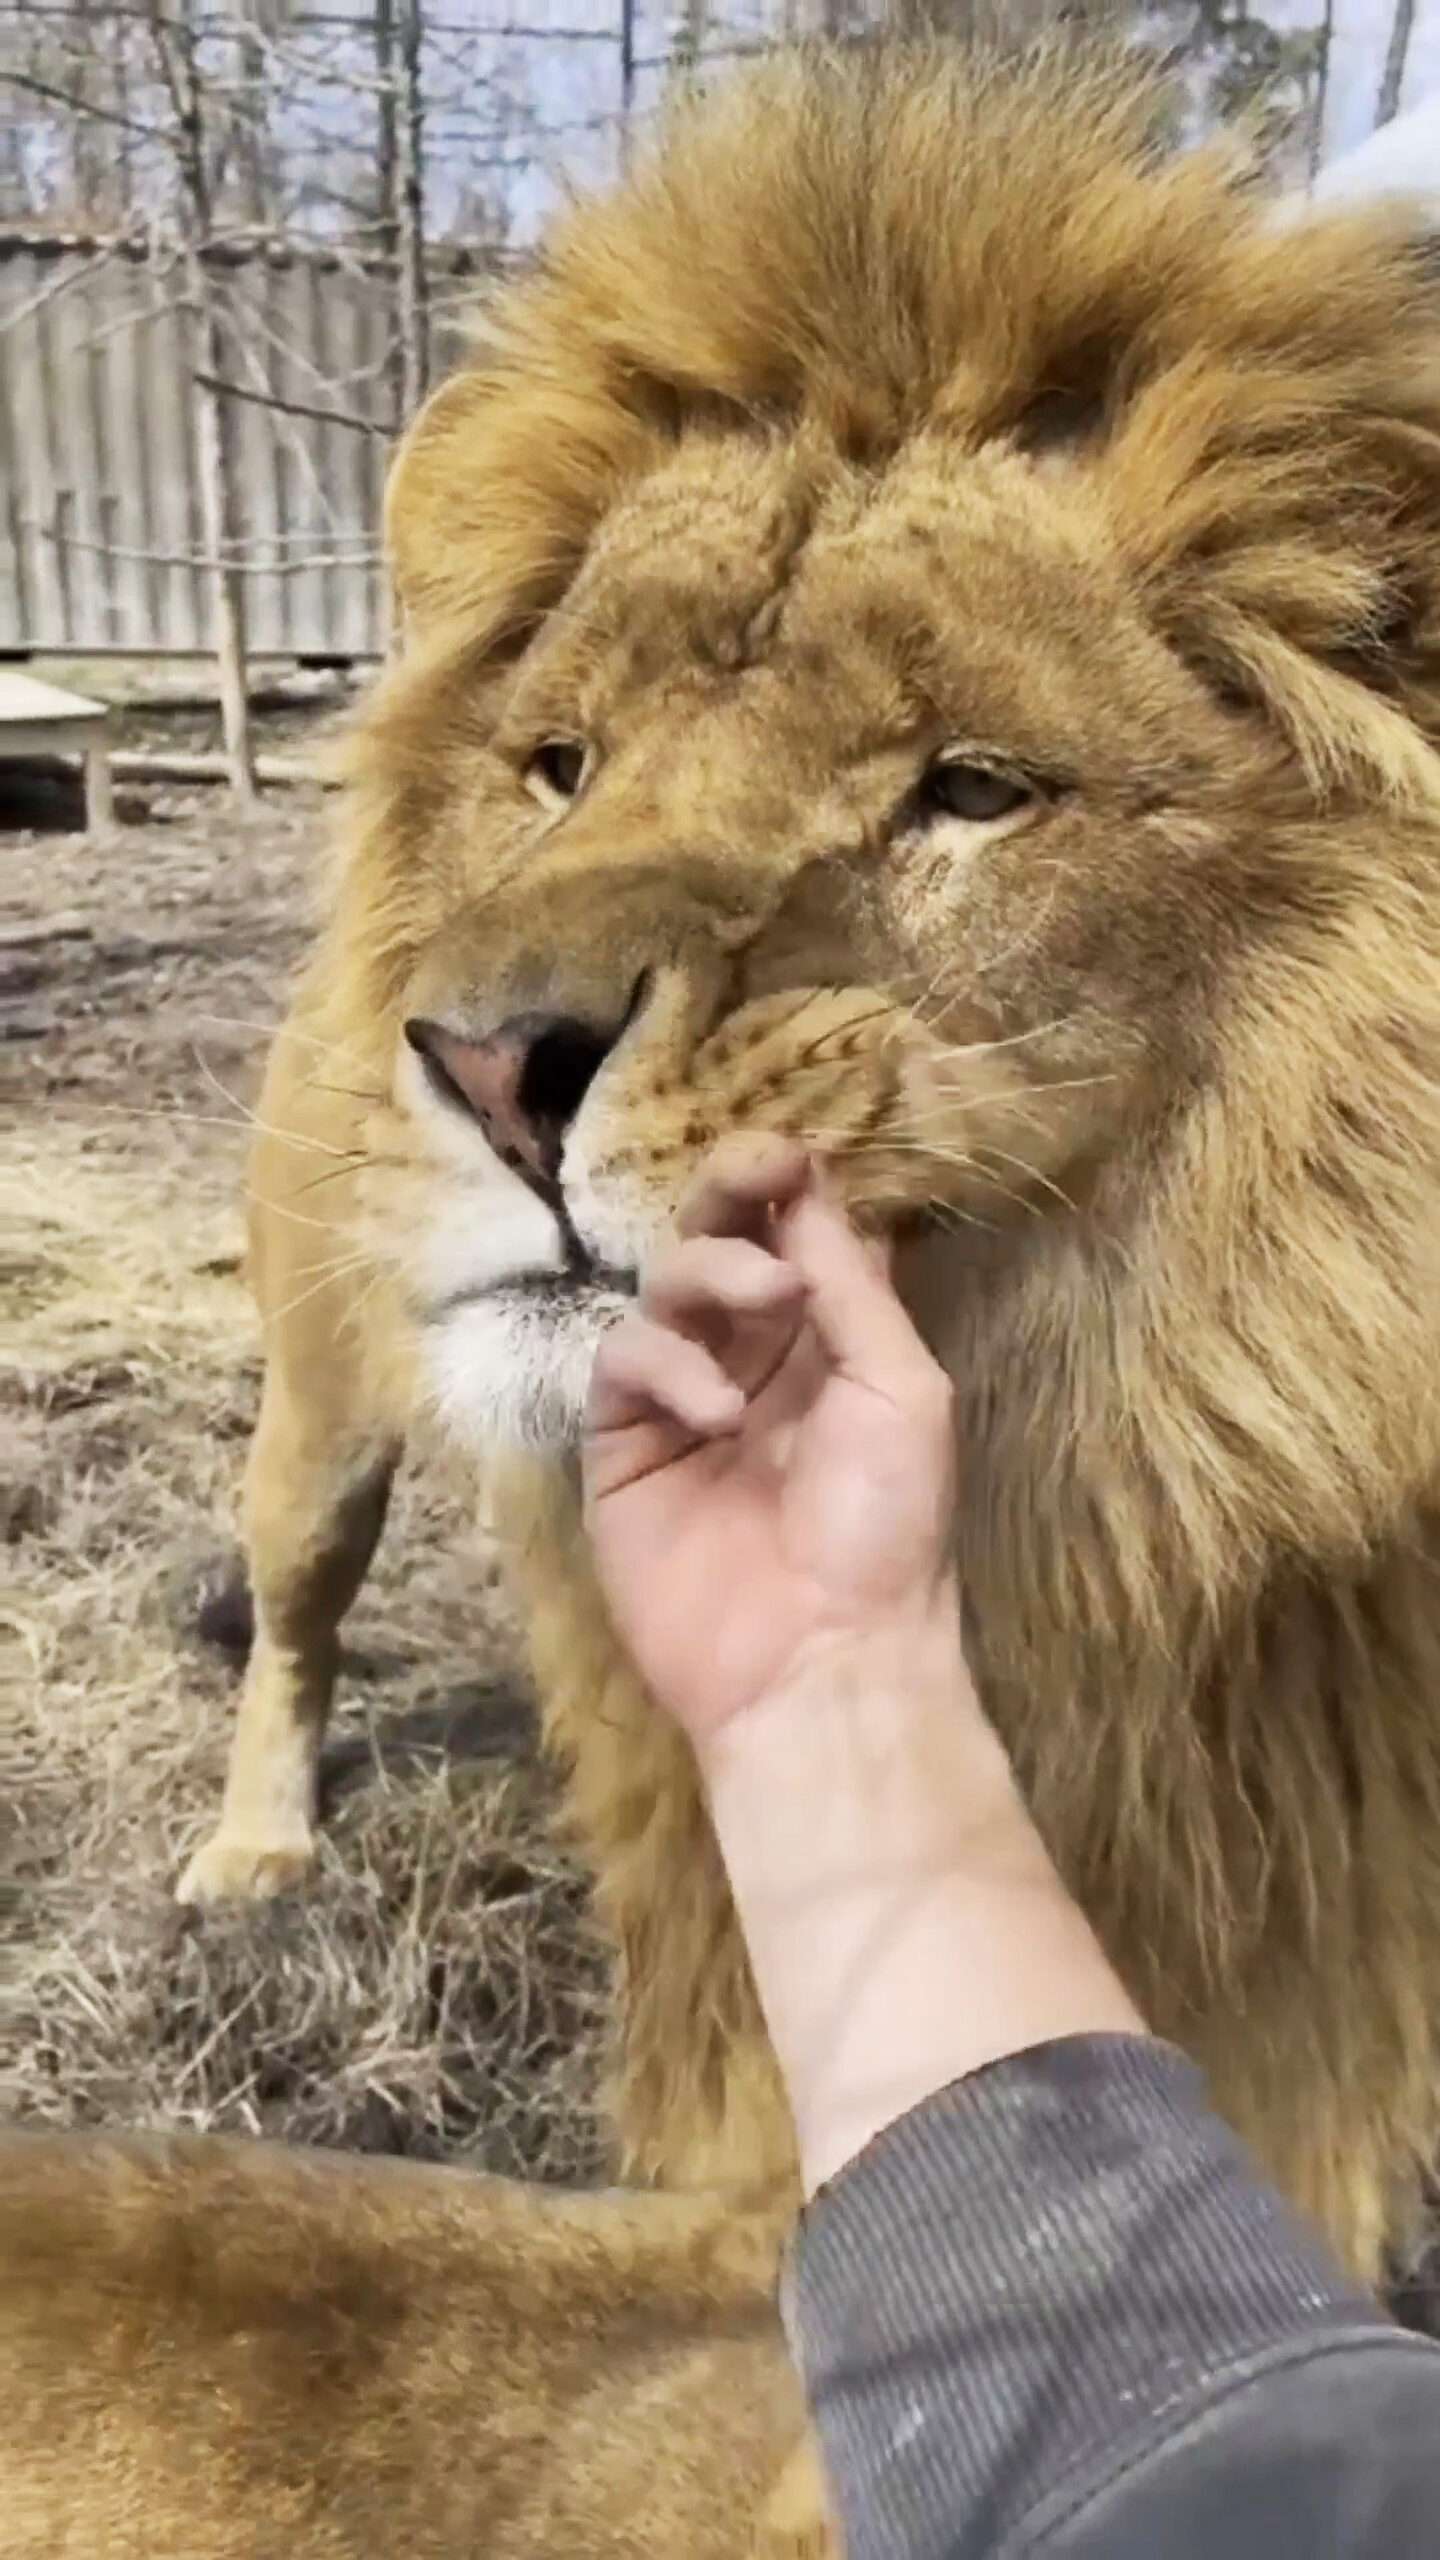 Read more about the article ROAR-SOME BOND: Zookeeper Sticks Fingers In Lion’s Mouth To Tease Him